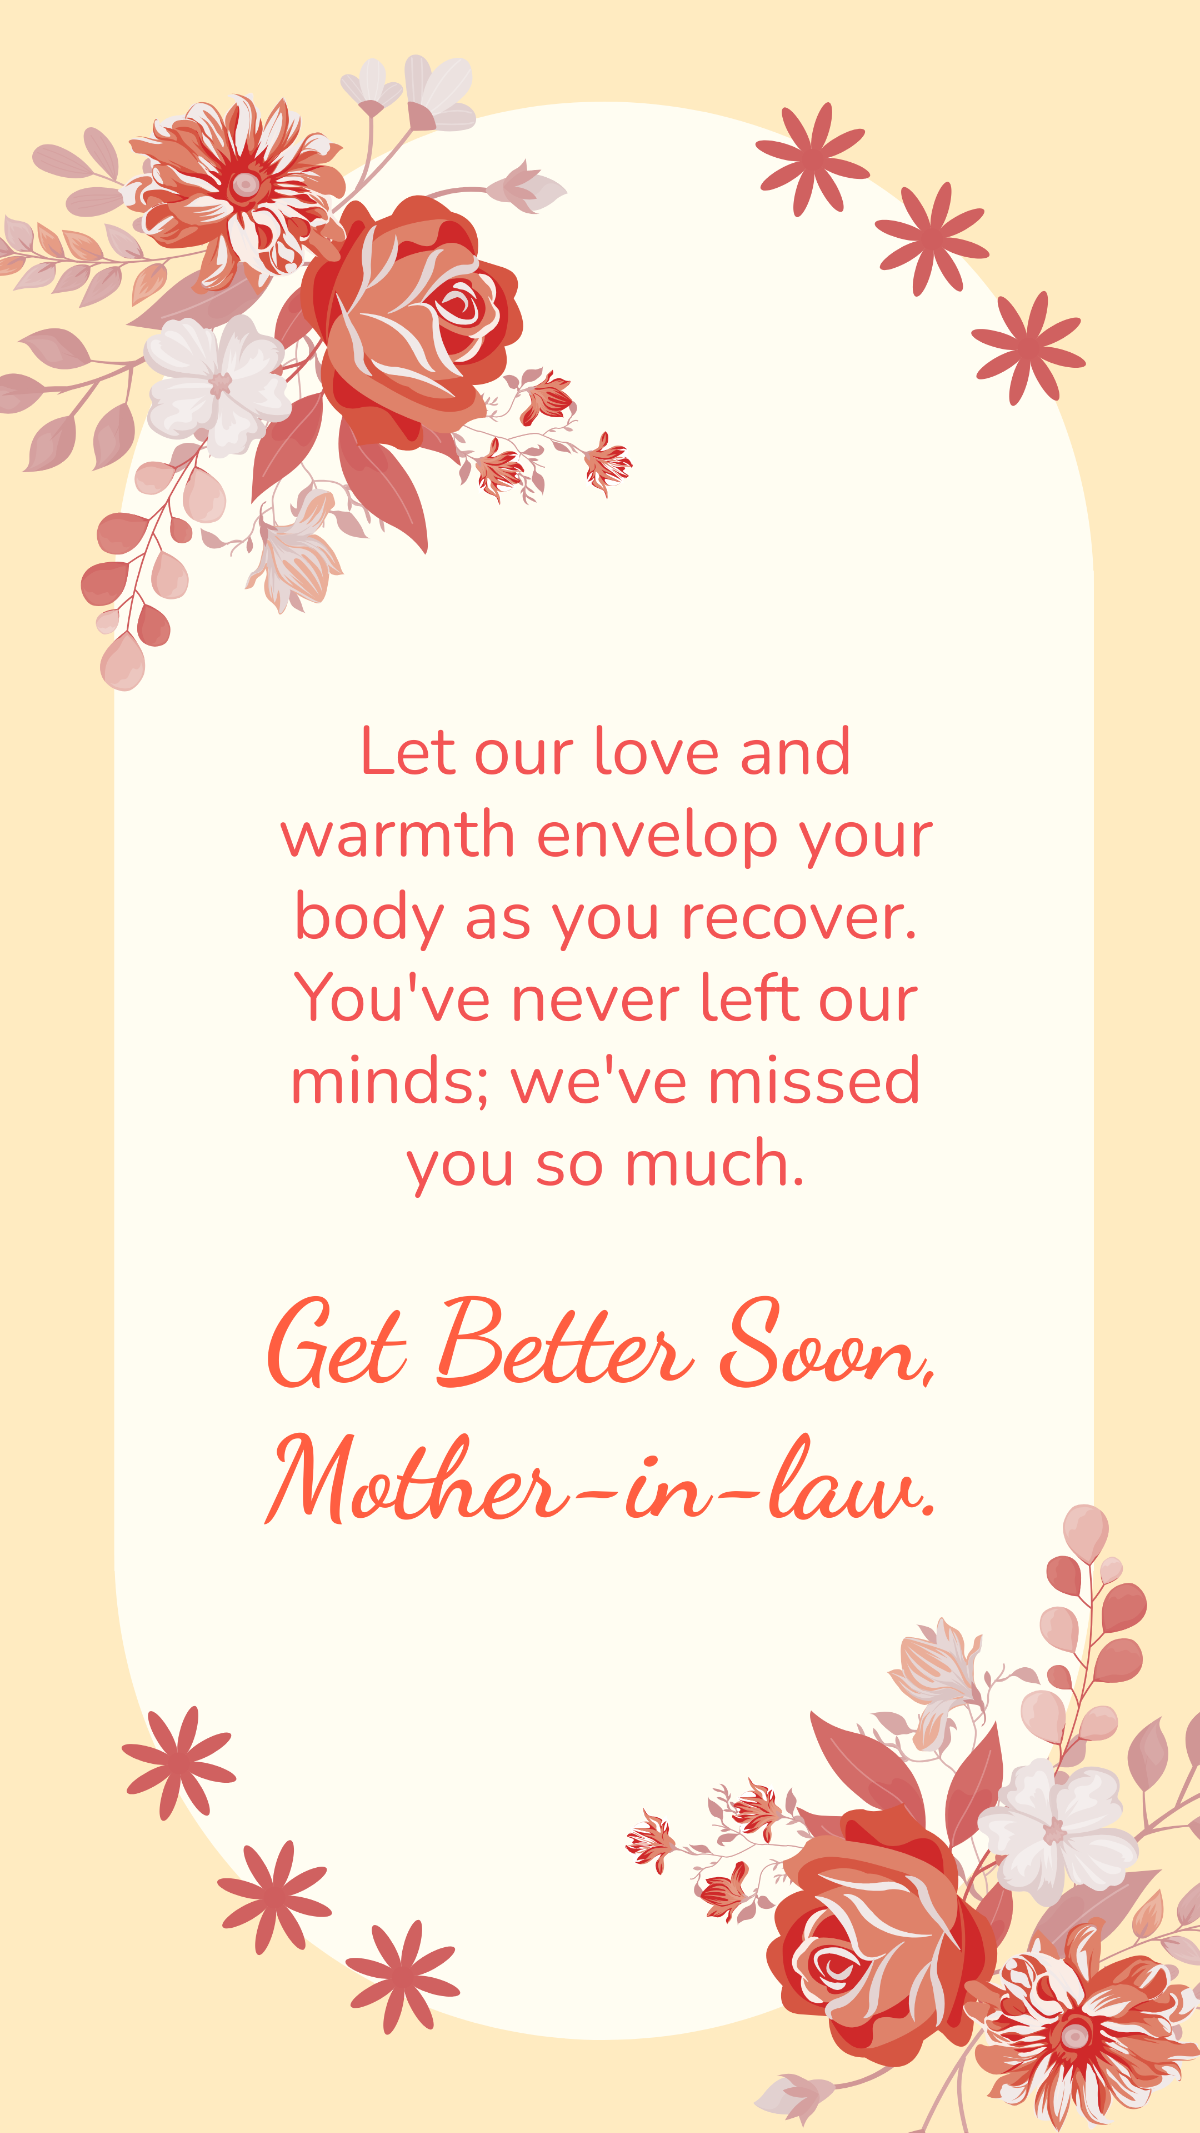 Get Well Soon Message For Mother In Law